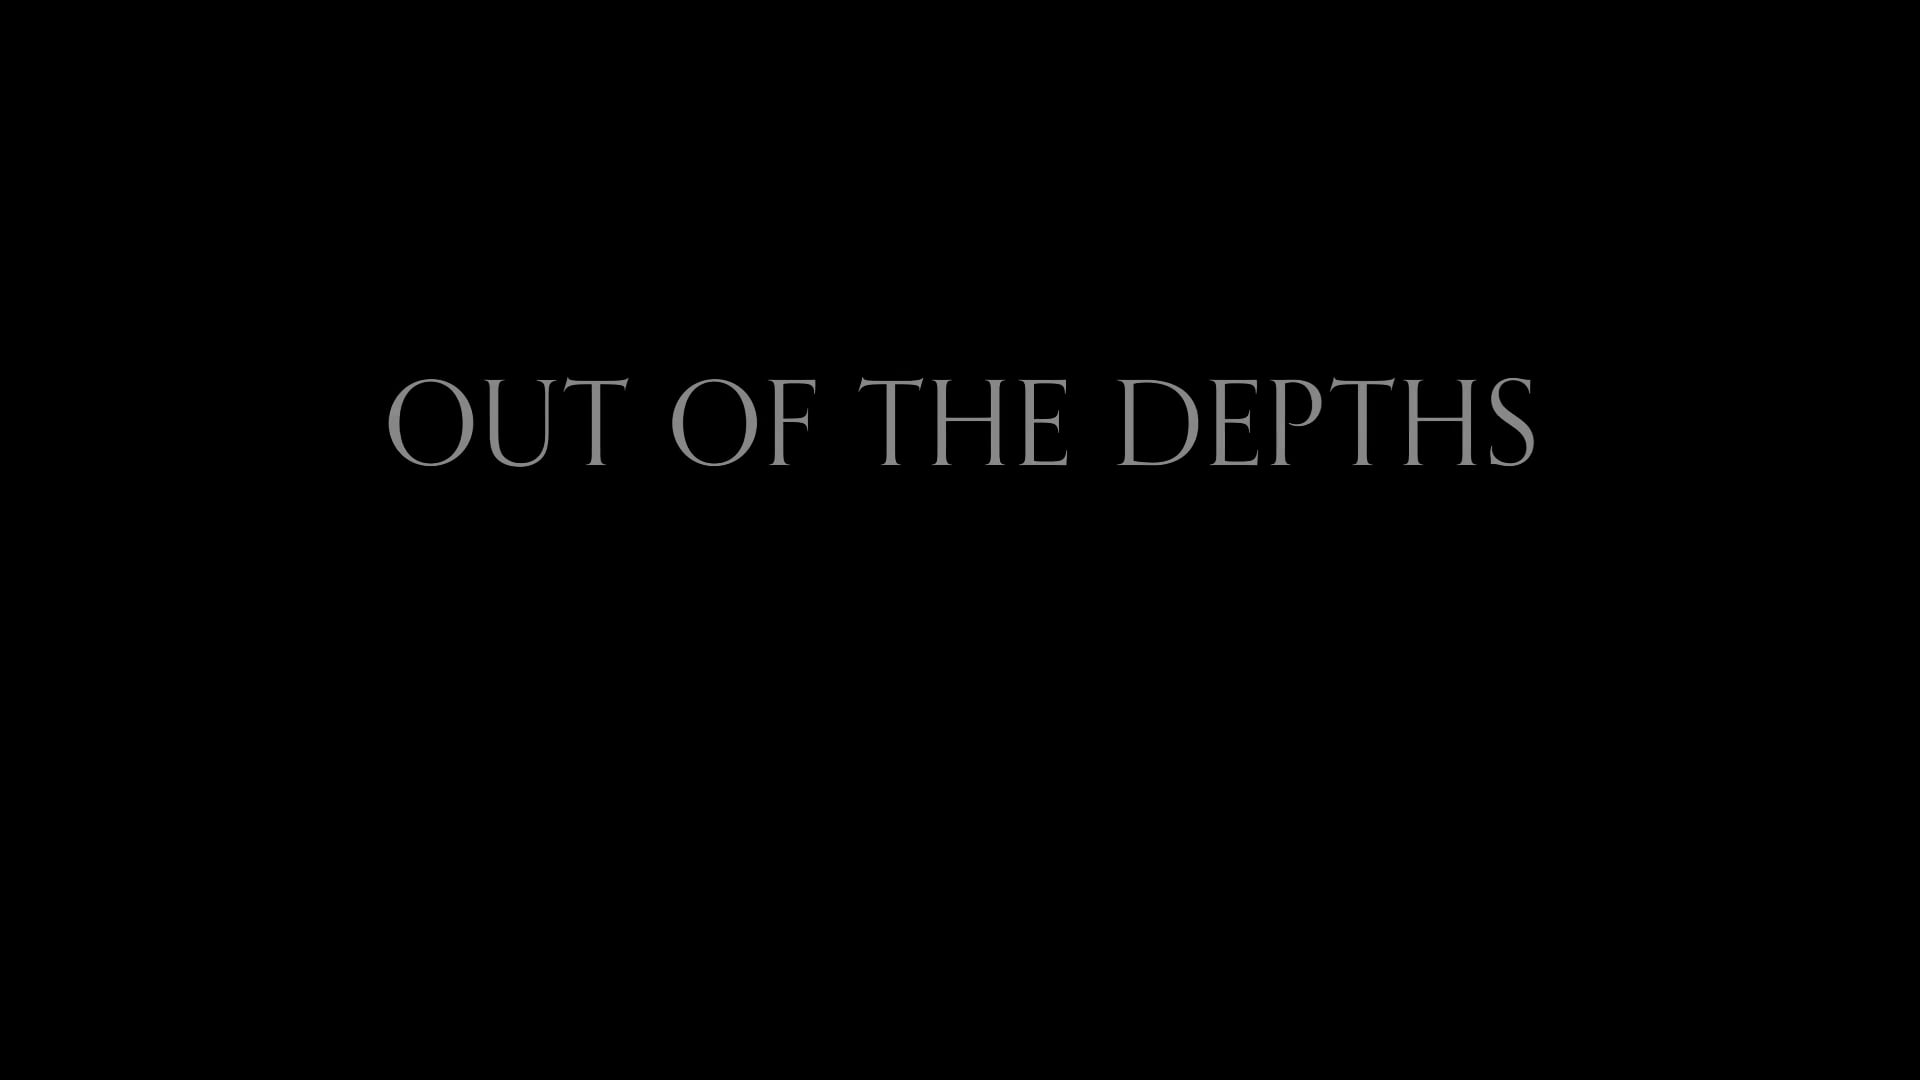 Out of the Depths / Nelson Ebo / Music by Dimitri Arnauts